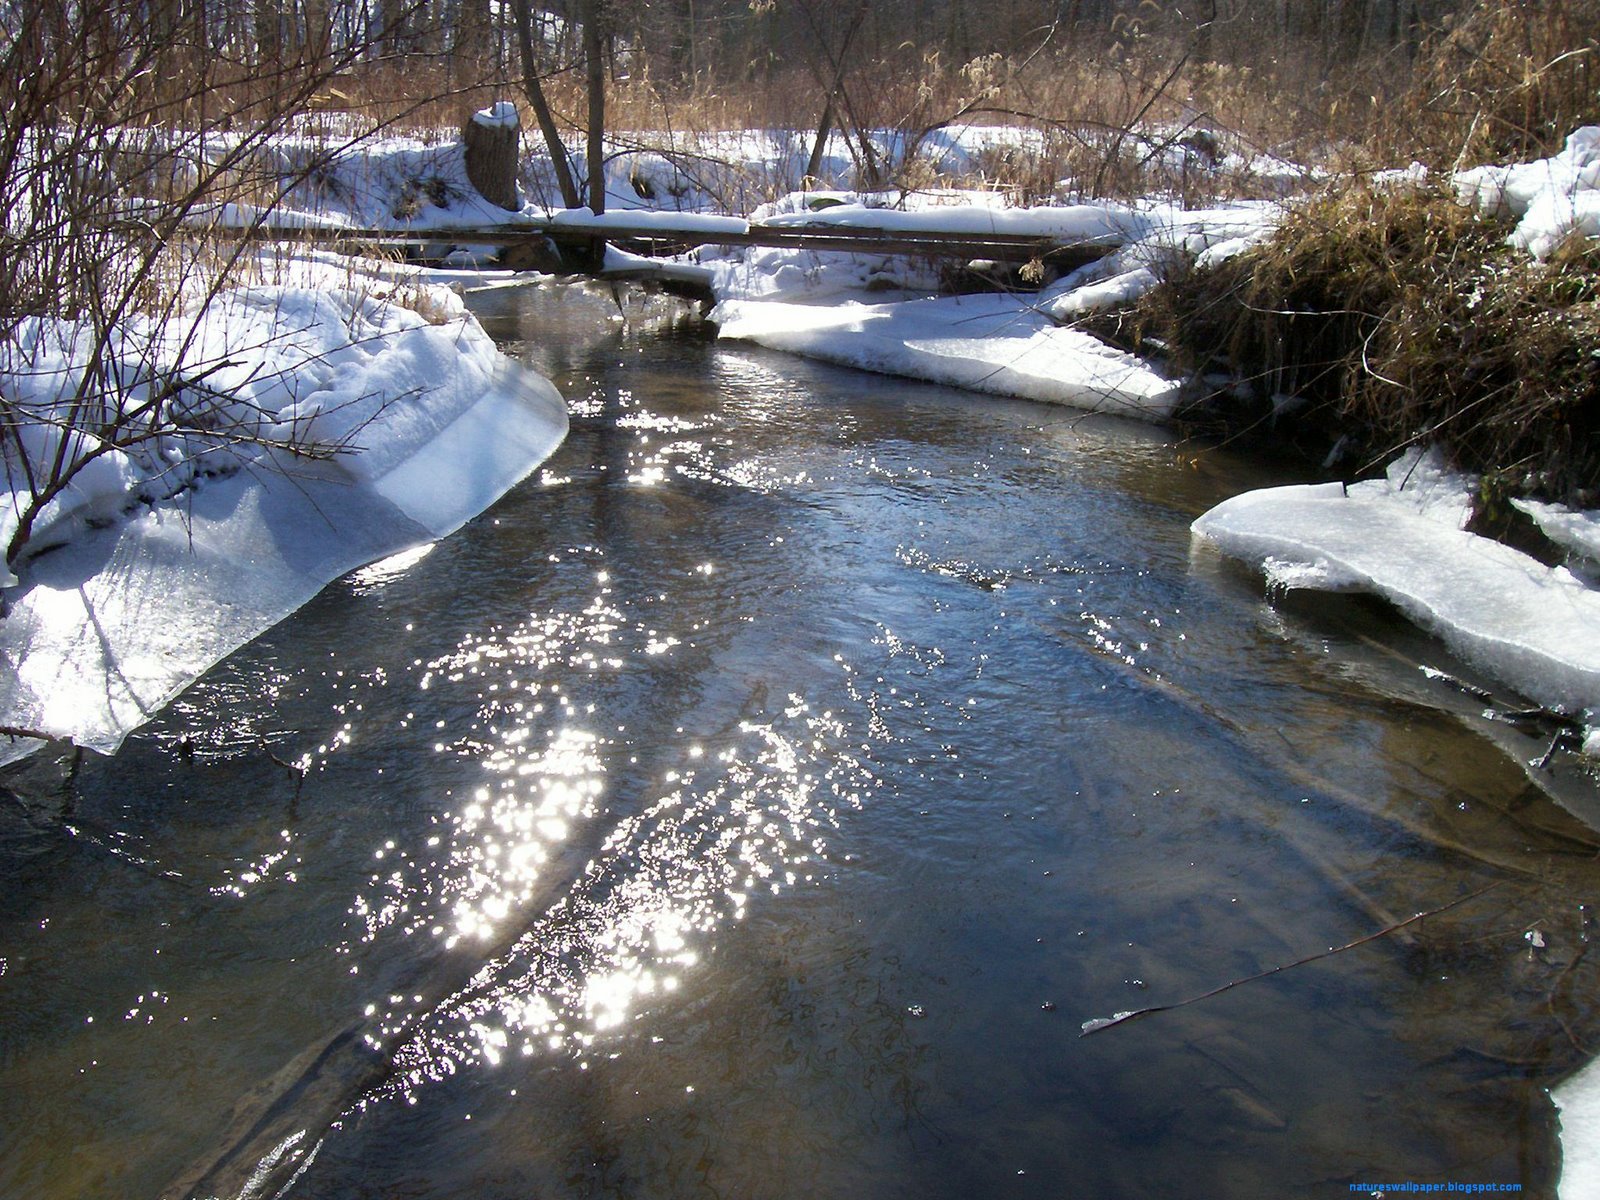 [Small+River+With+Ice+On+The+Sides.JPG]